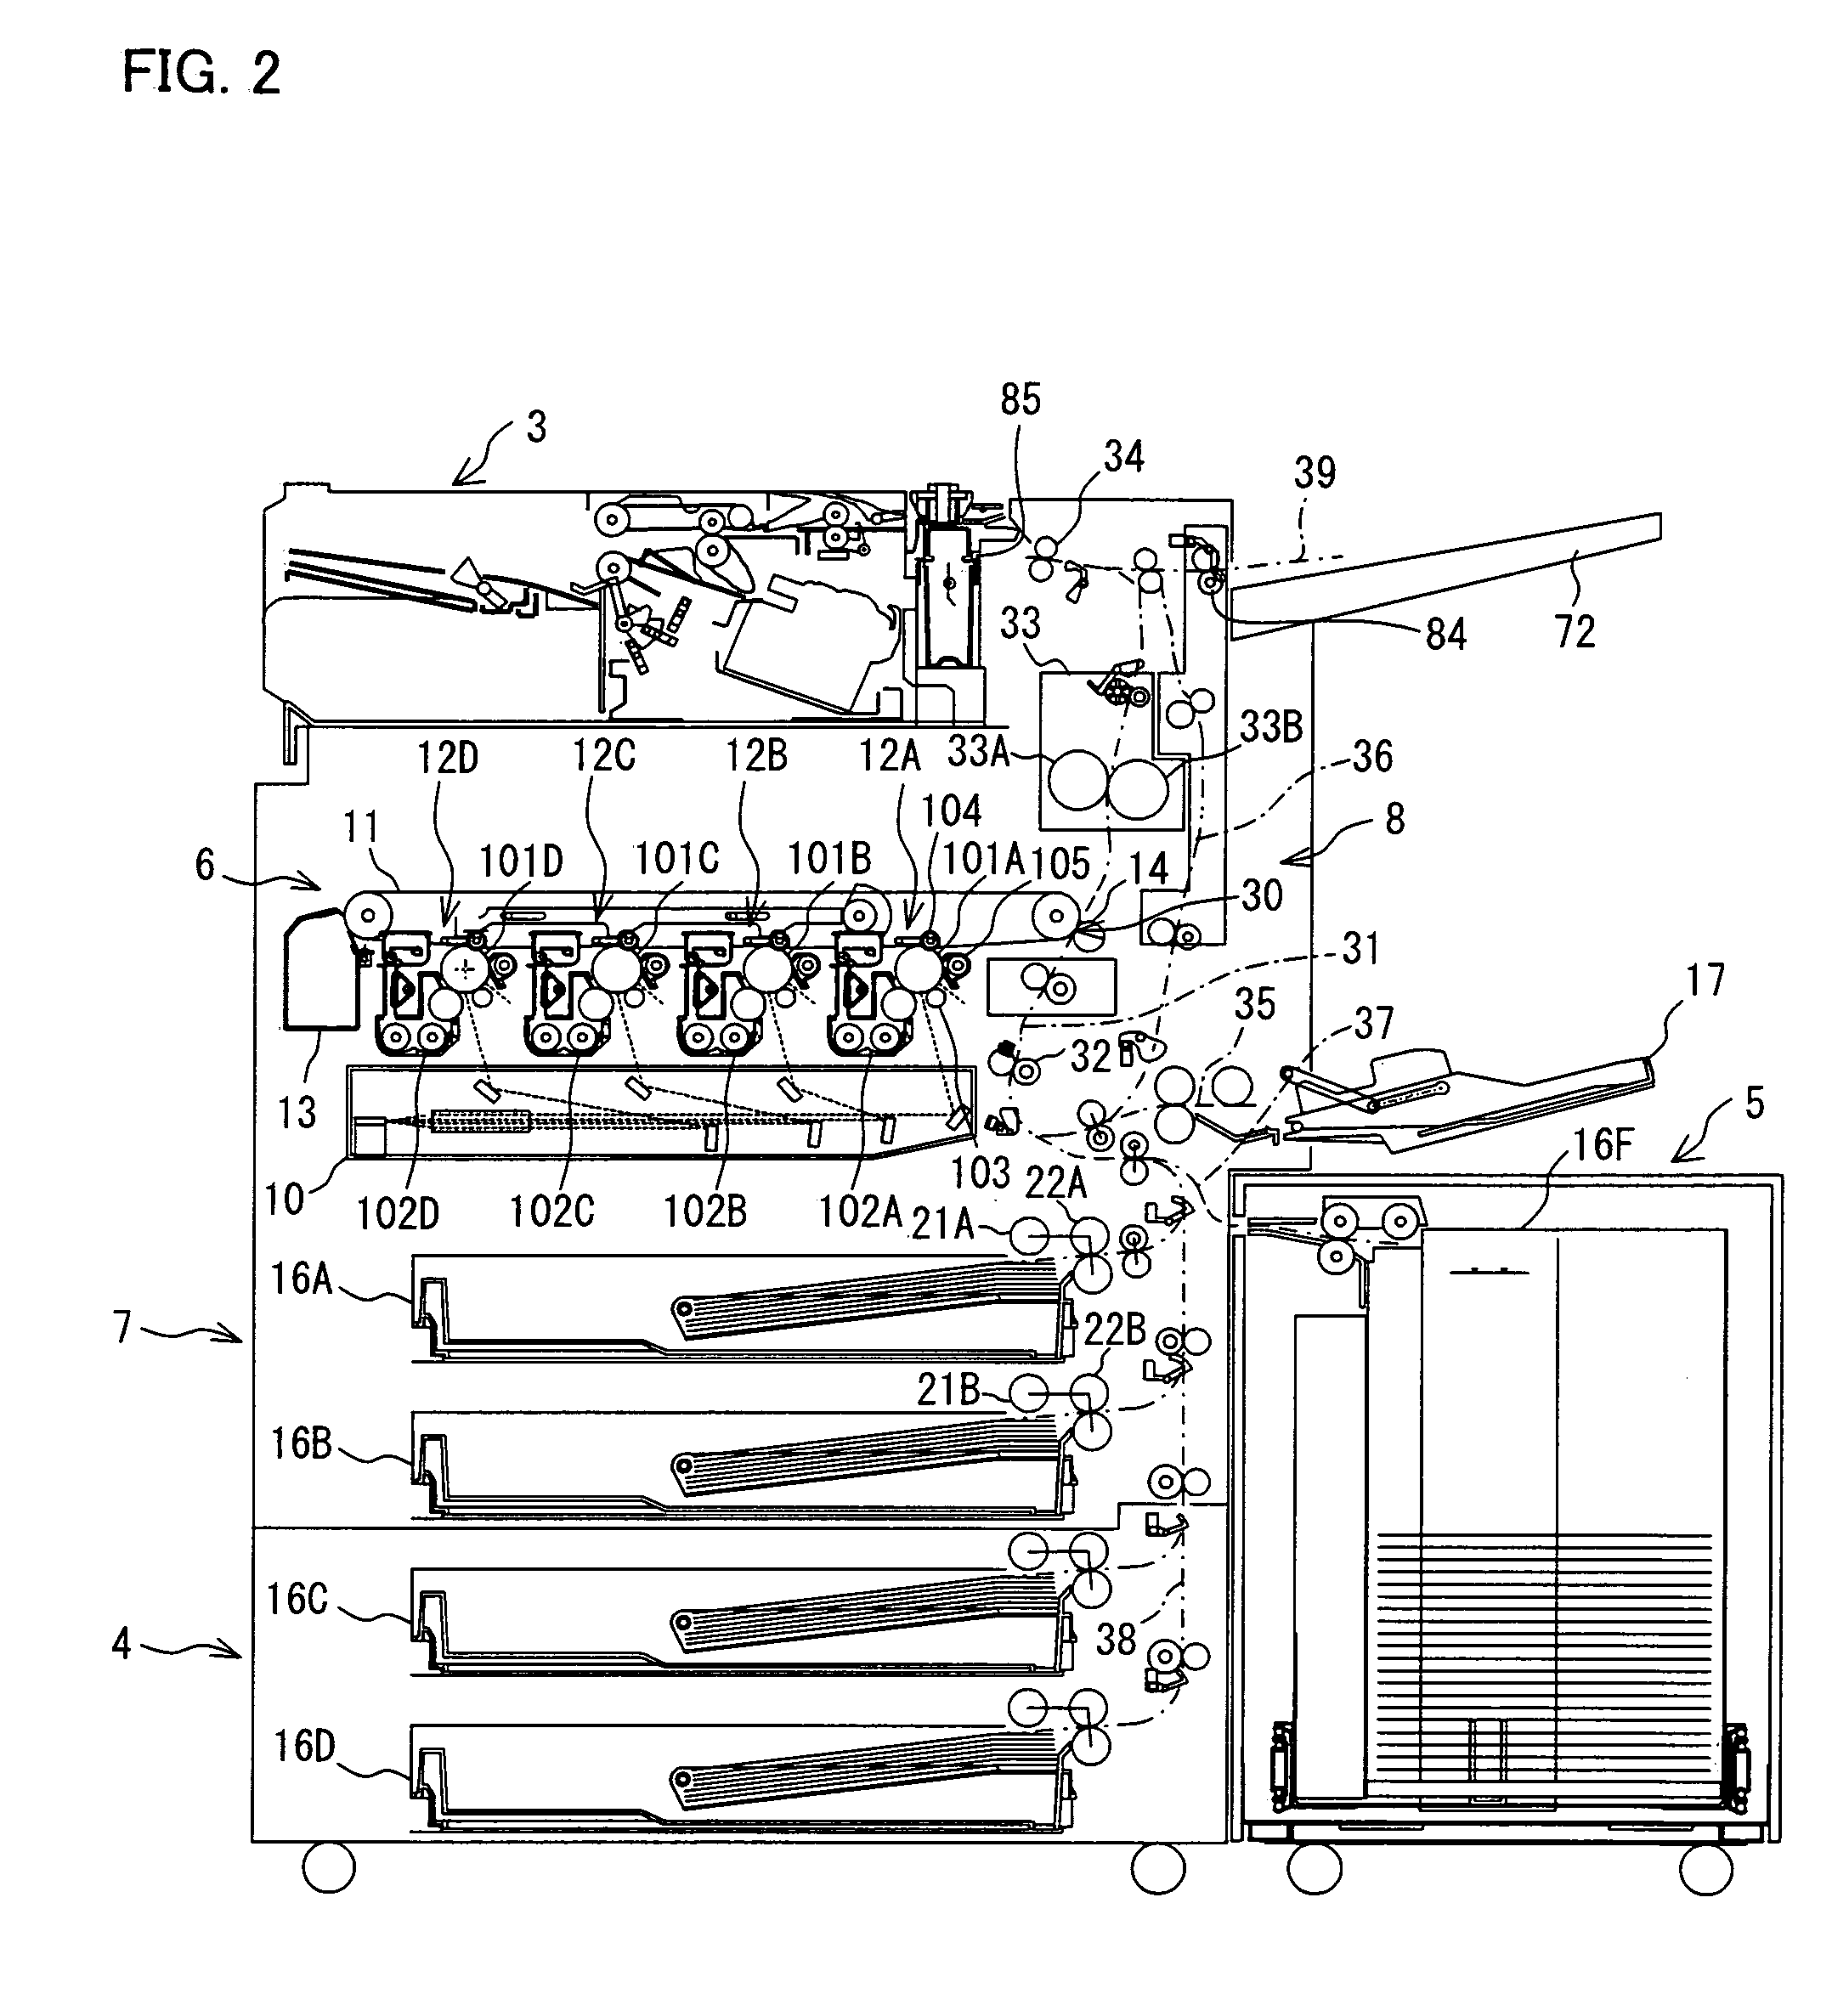 Image forming apparatus capable of discharging stacked sheets